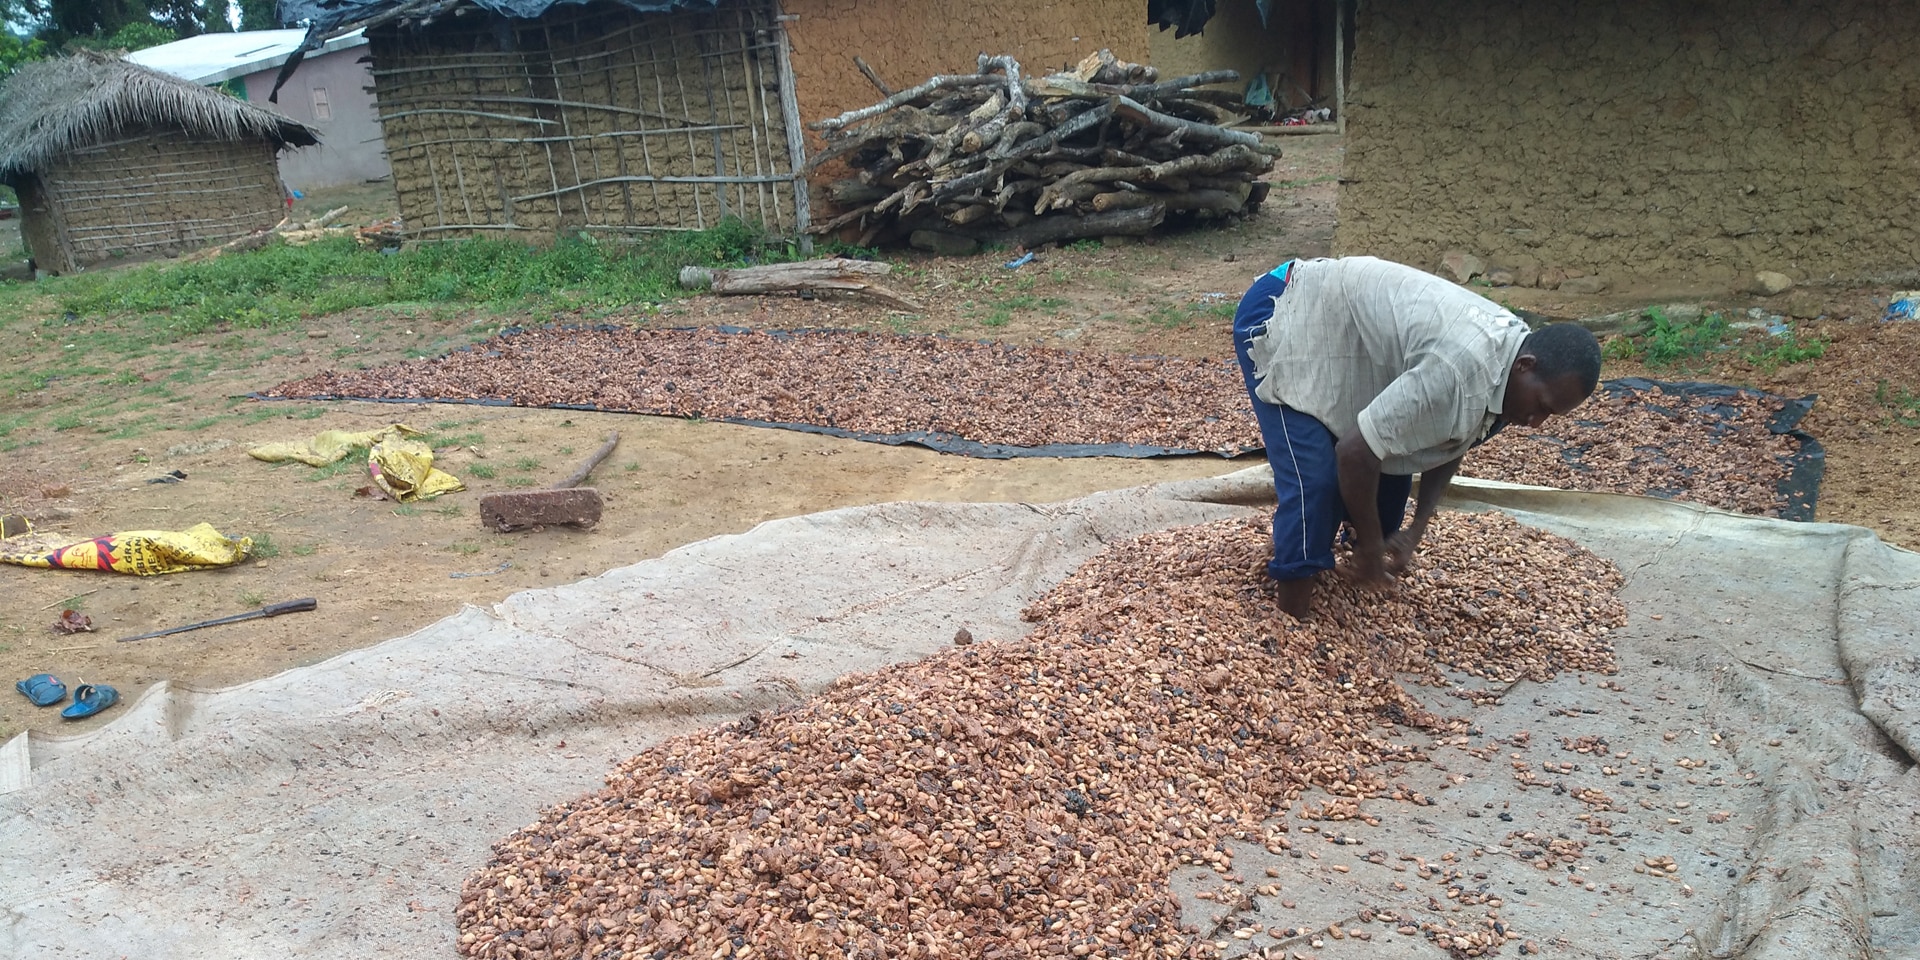   A cocoa farmer spreads cocoa beans on a plastic sheet to dry. 